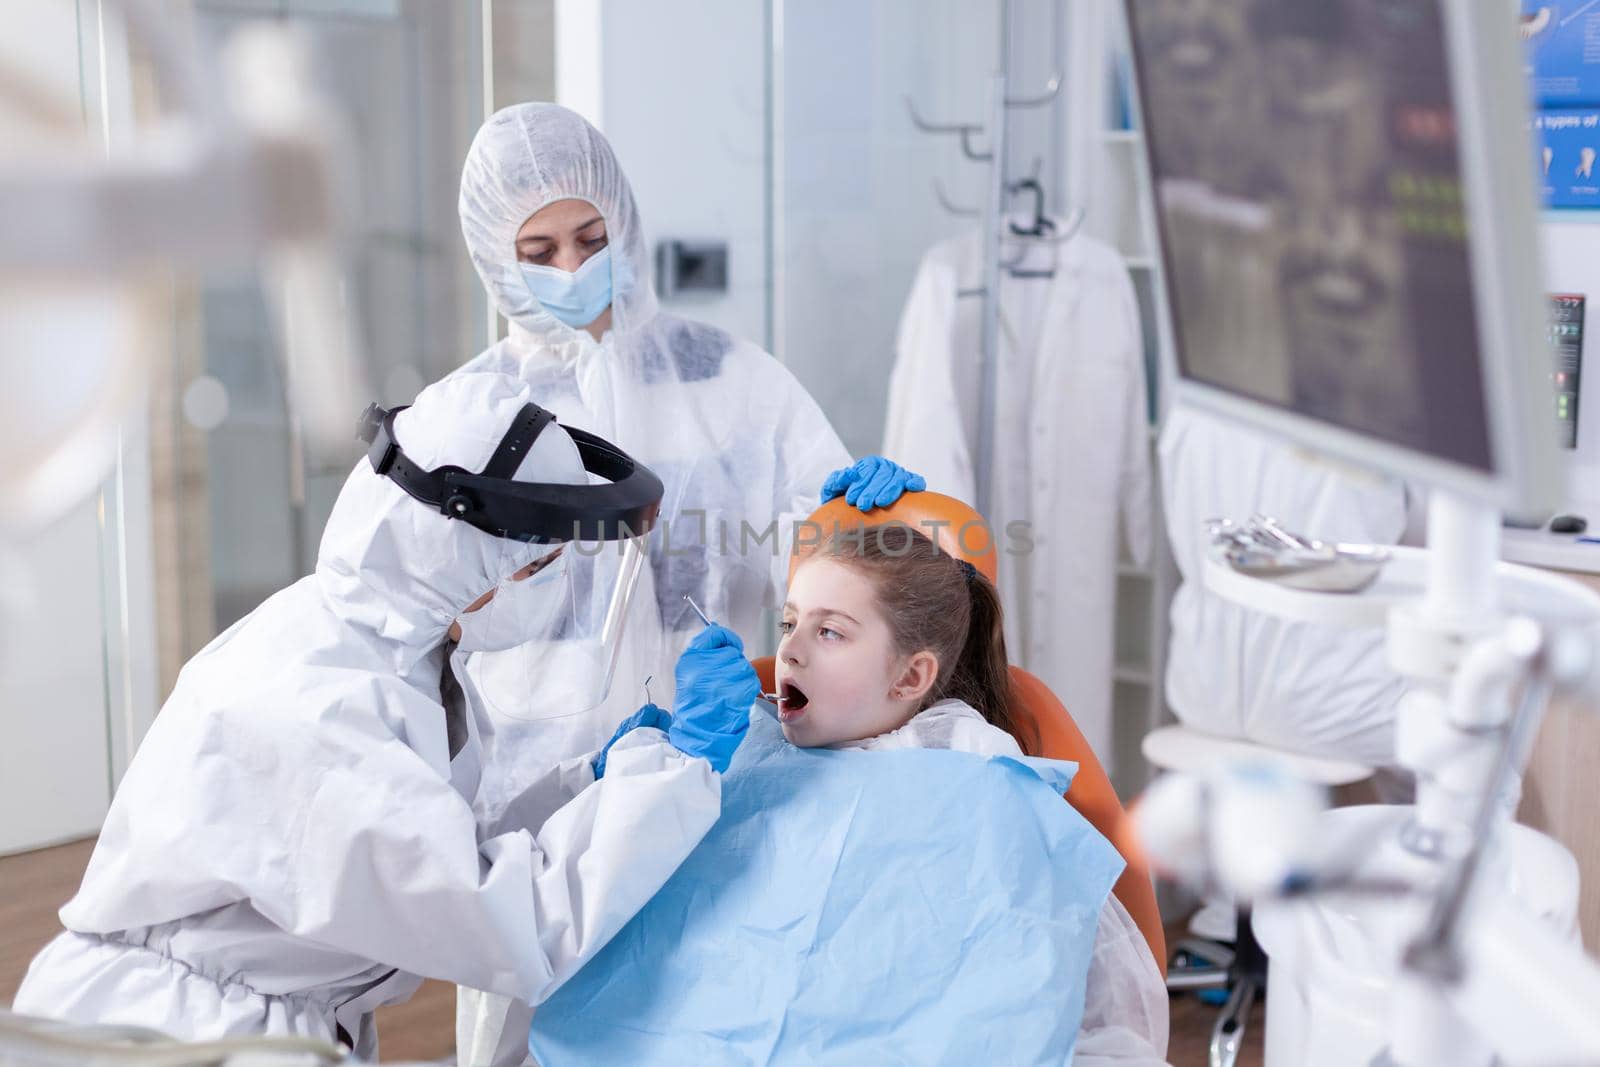 Stomatolog in the course of caries treatment for kid dressed in ppe suit as safety precaution Dentist in coronavirus suit using curved mirror during teeth examination of child.